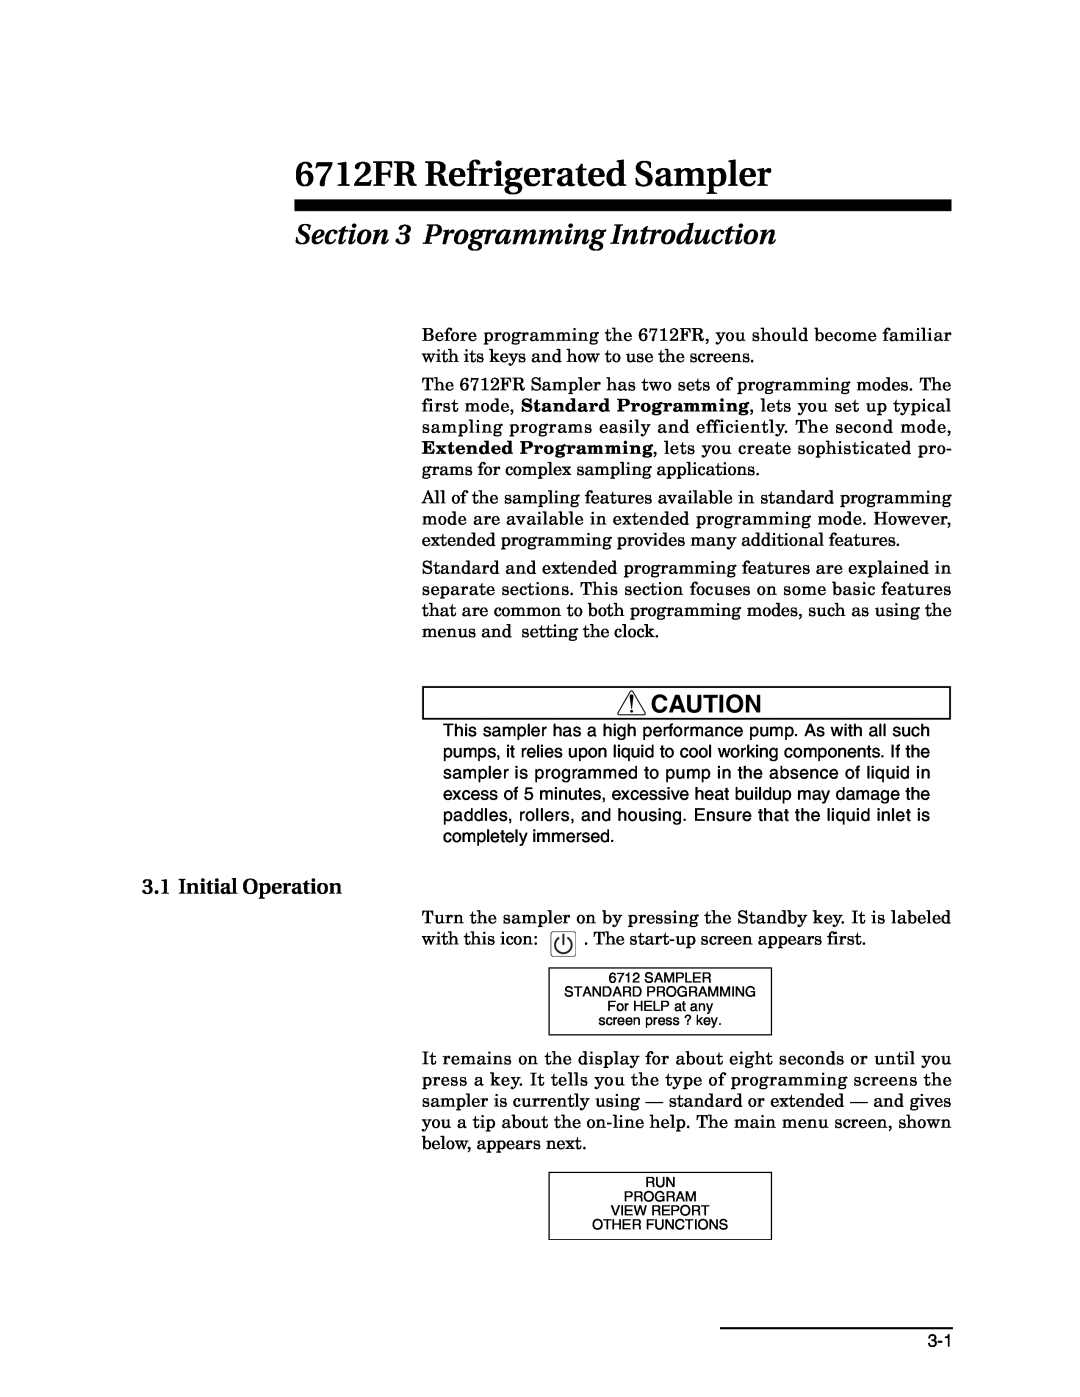 Teledyne manual Programming Introduction, Initial Operation, 6712FR Refrigerated Sampler 